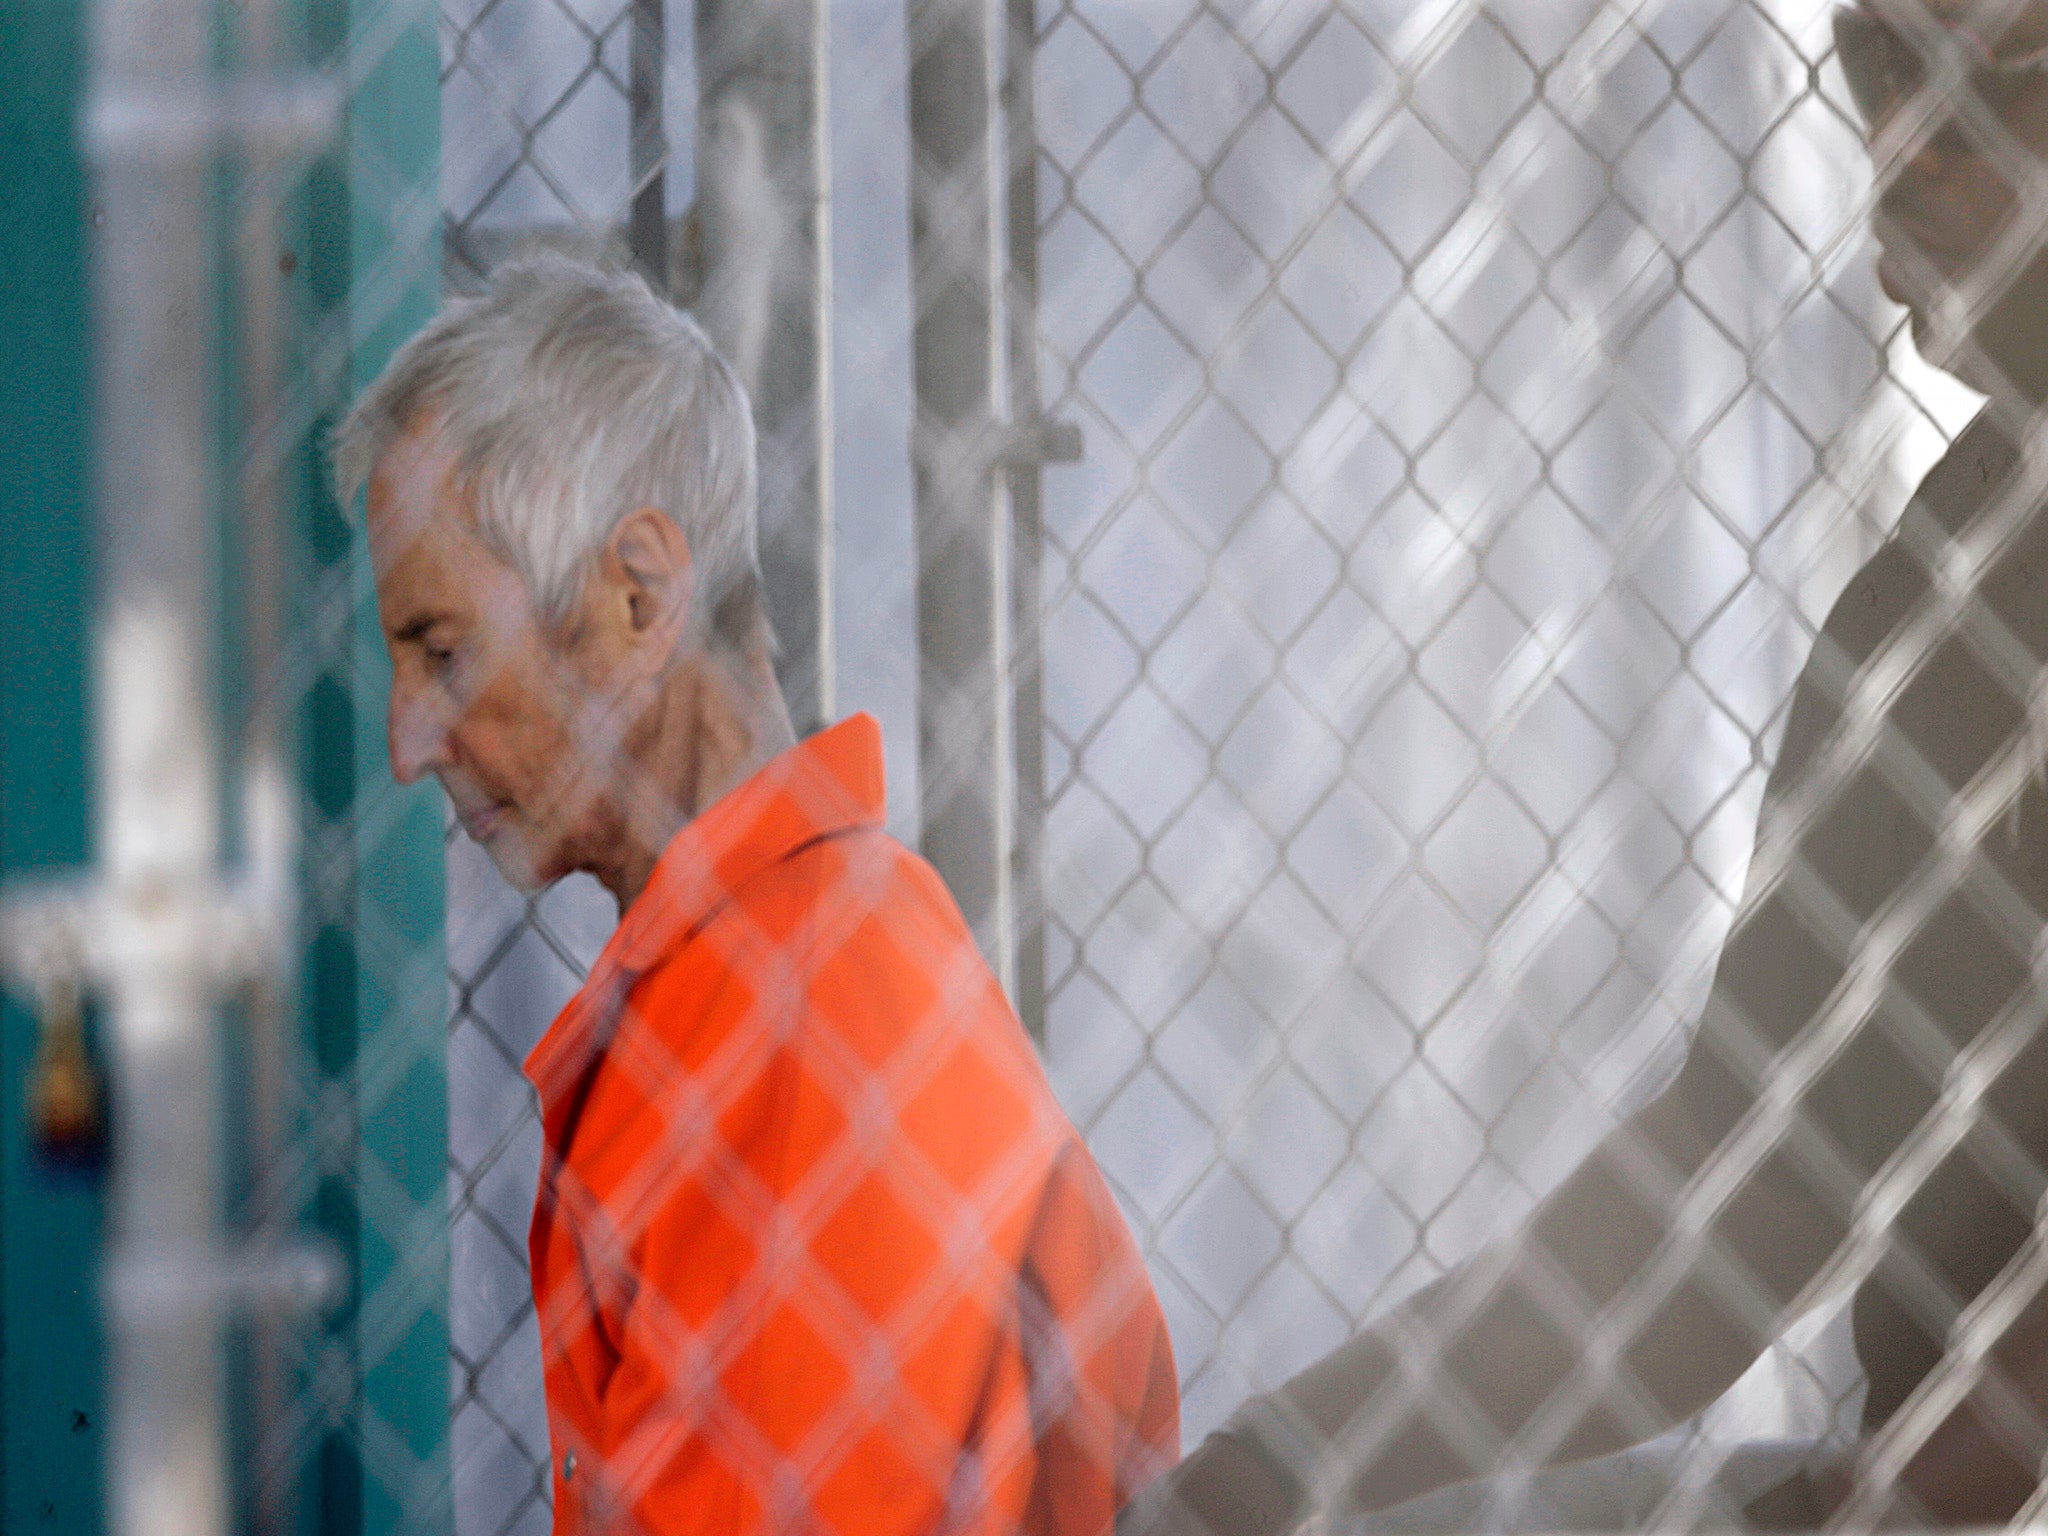 Robert Durst has been transferred to a mental health facility